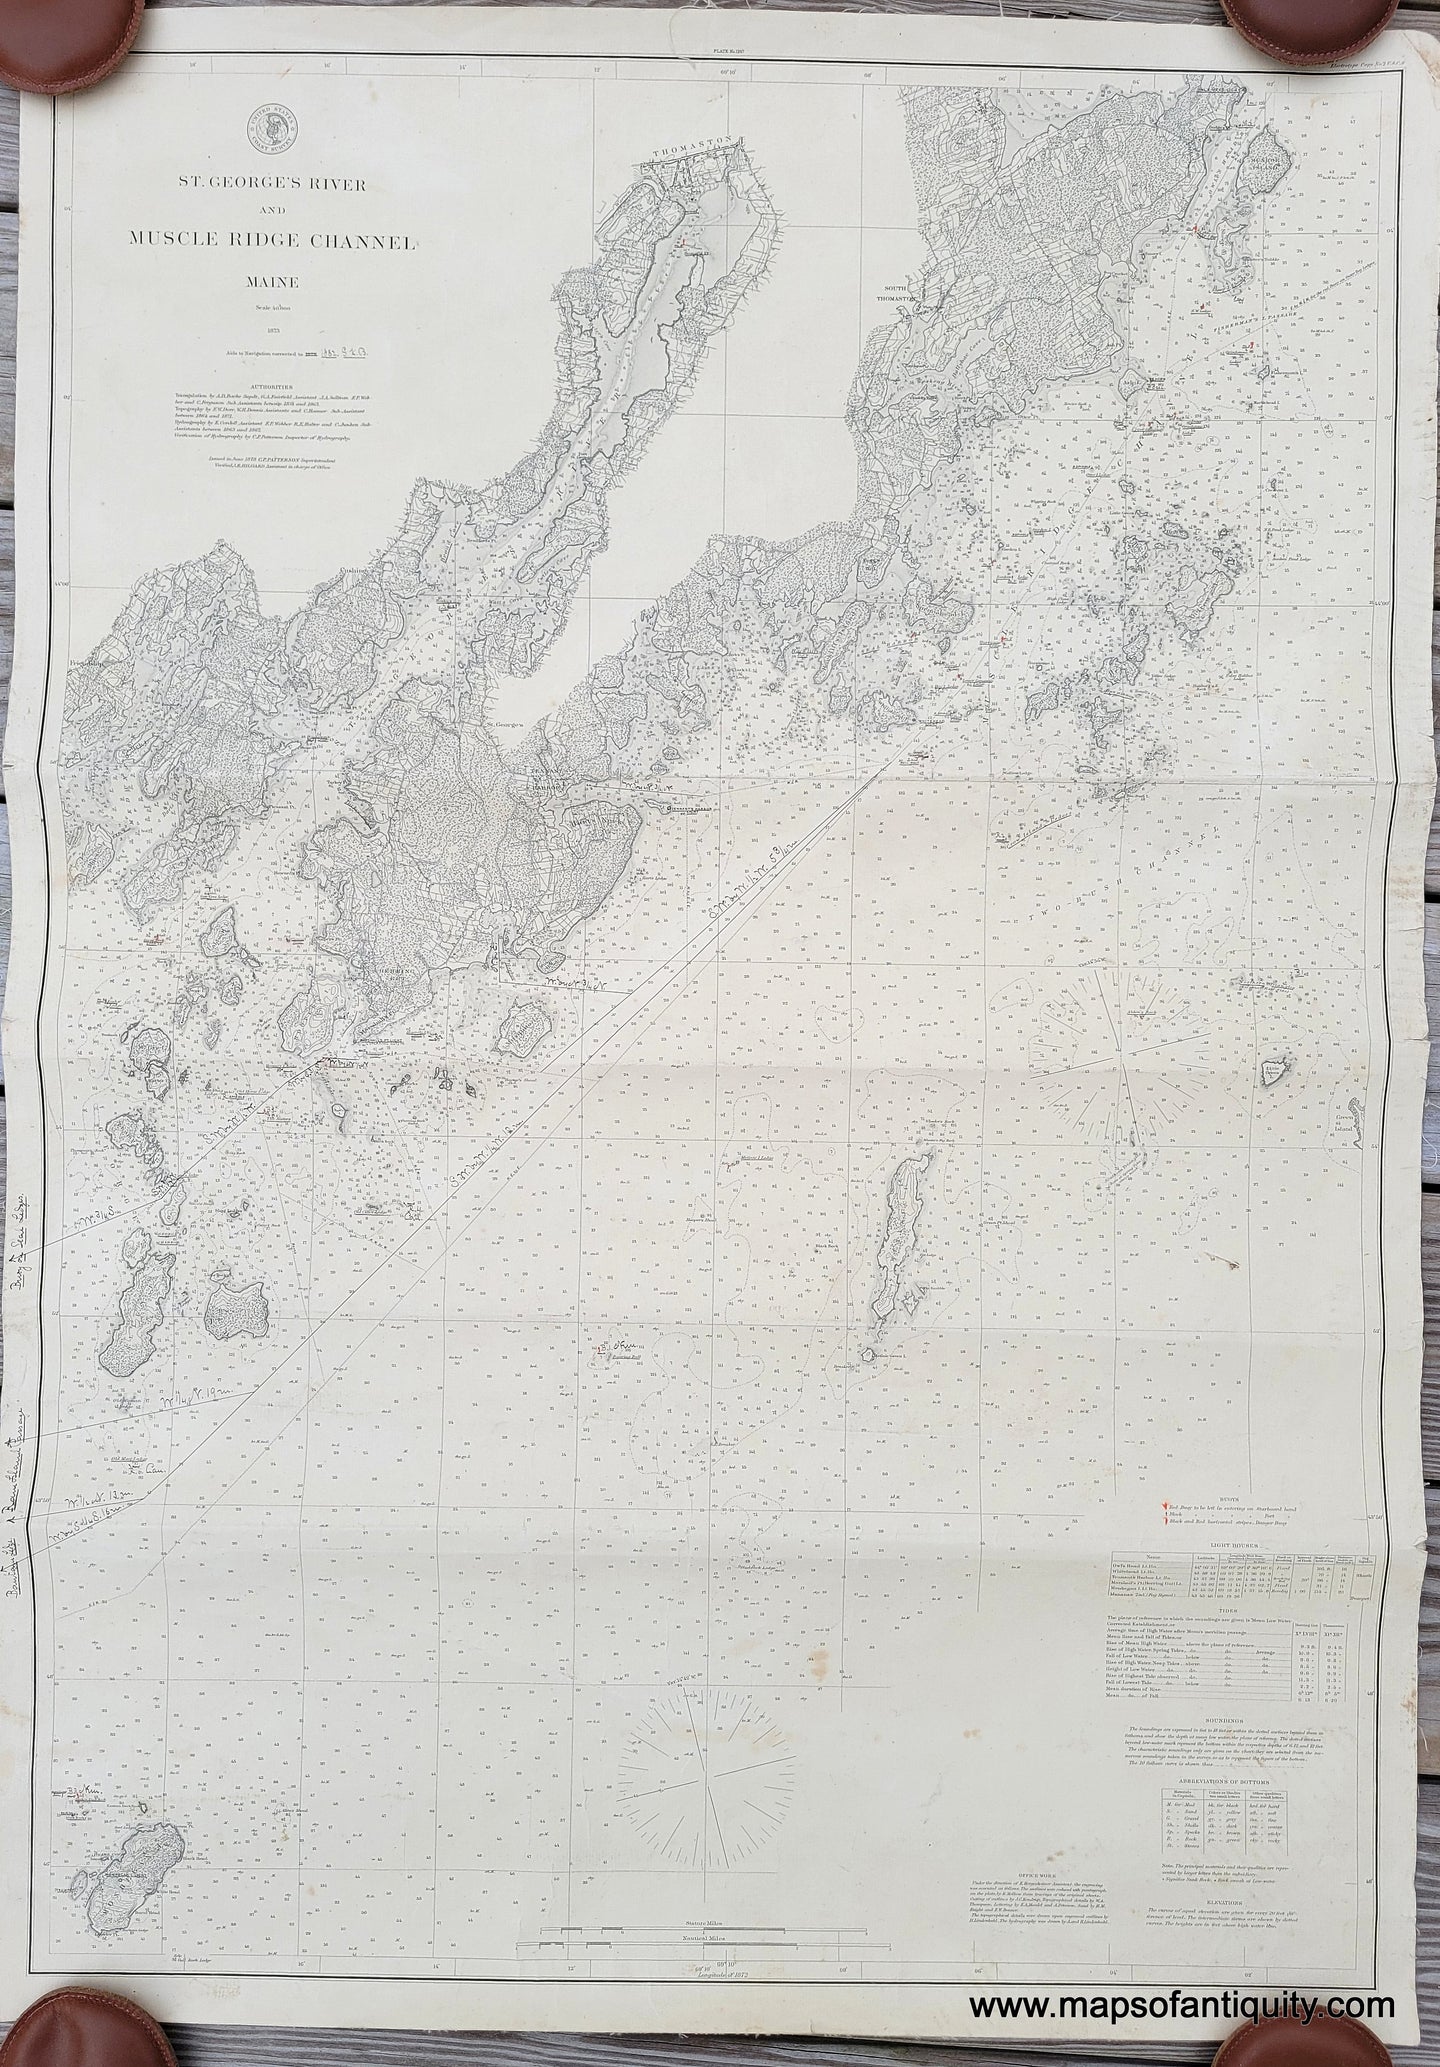 MAI190A-Antique-Nautical-Chart-St-Georges-River-and-Muscle-Ridge-Channel-United-States-Maine-1878-US-Coast-Survey-Maps-Of-Antiquity